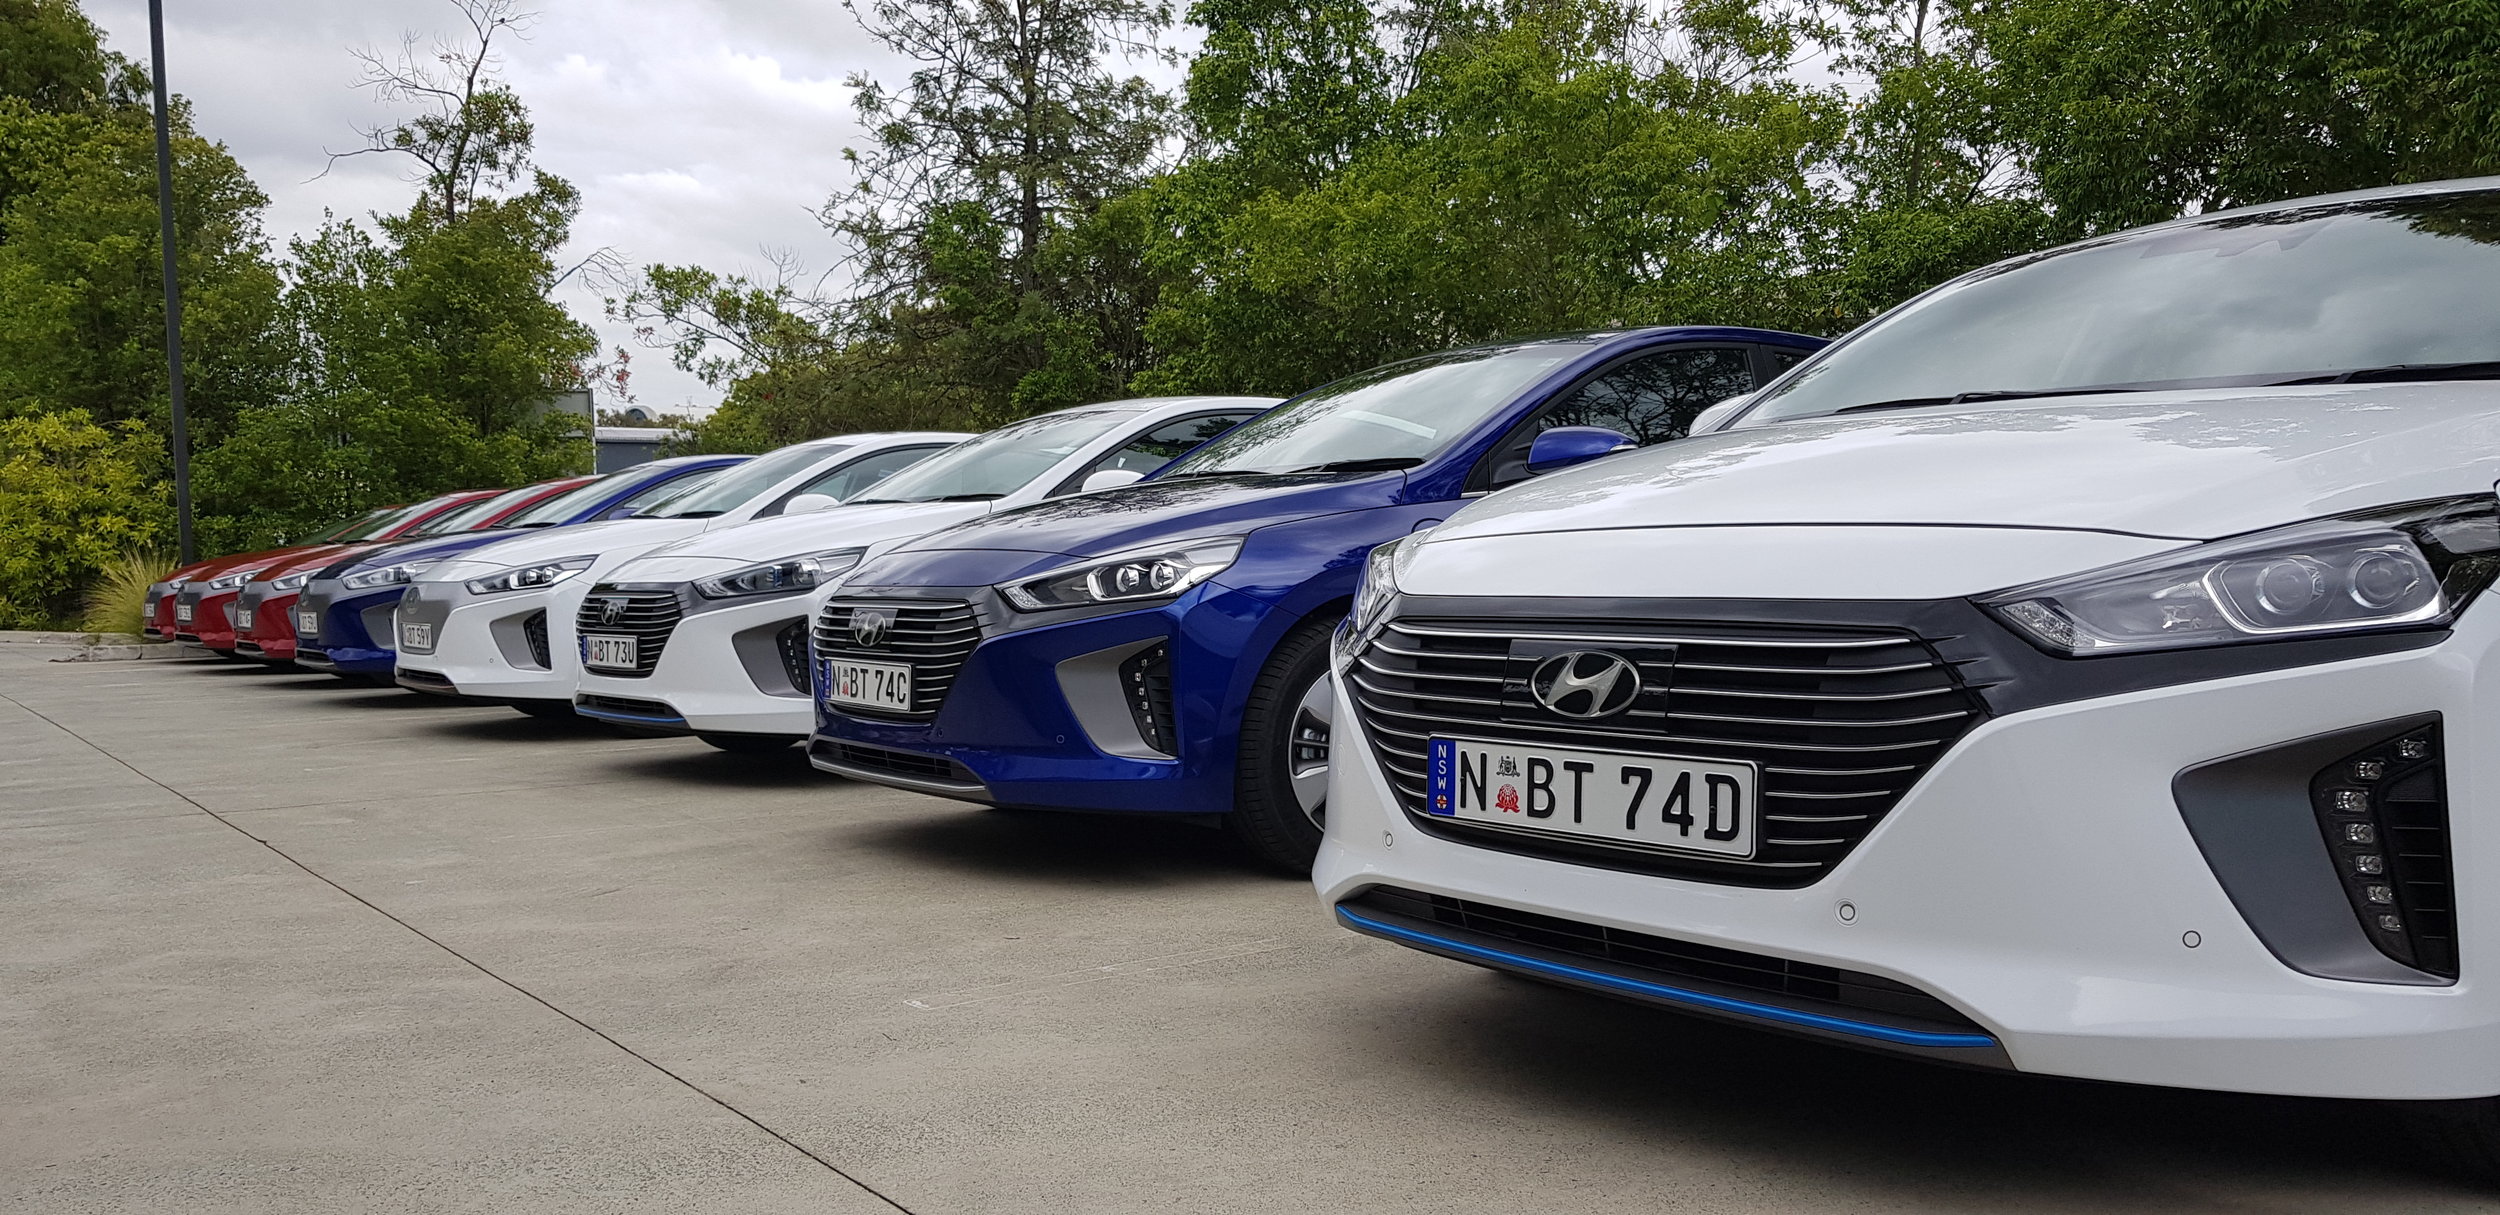 At the launch of the Hyundai Ioniq in QLD